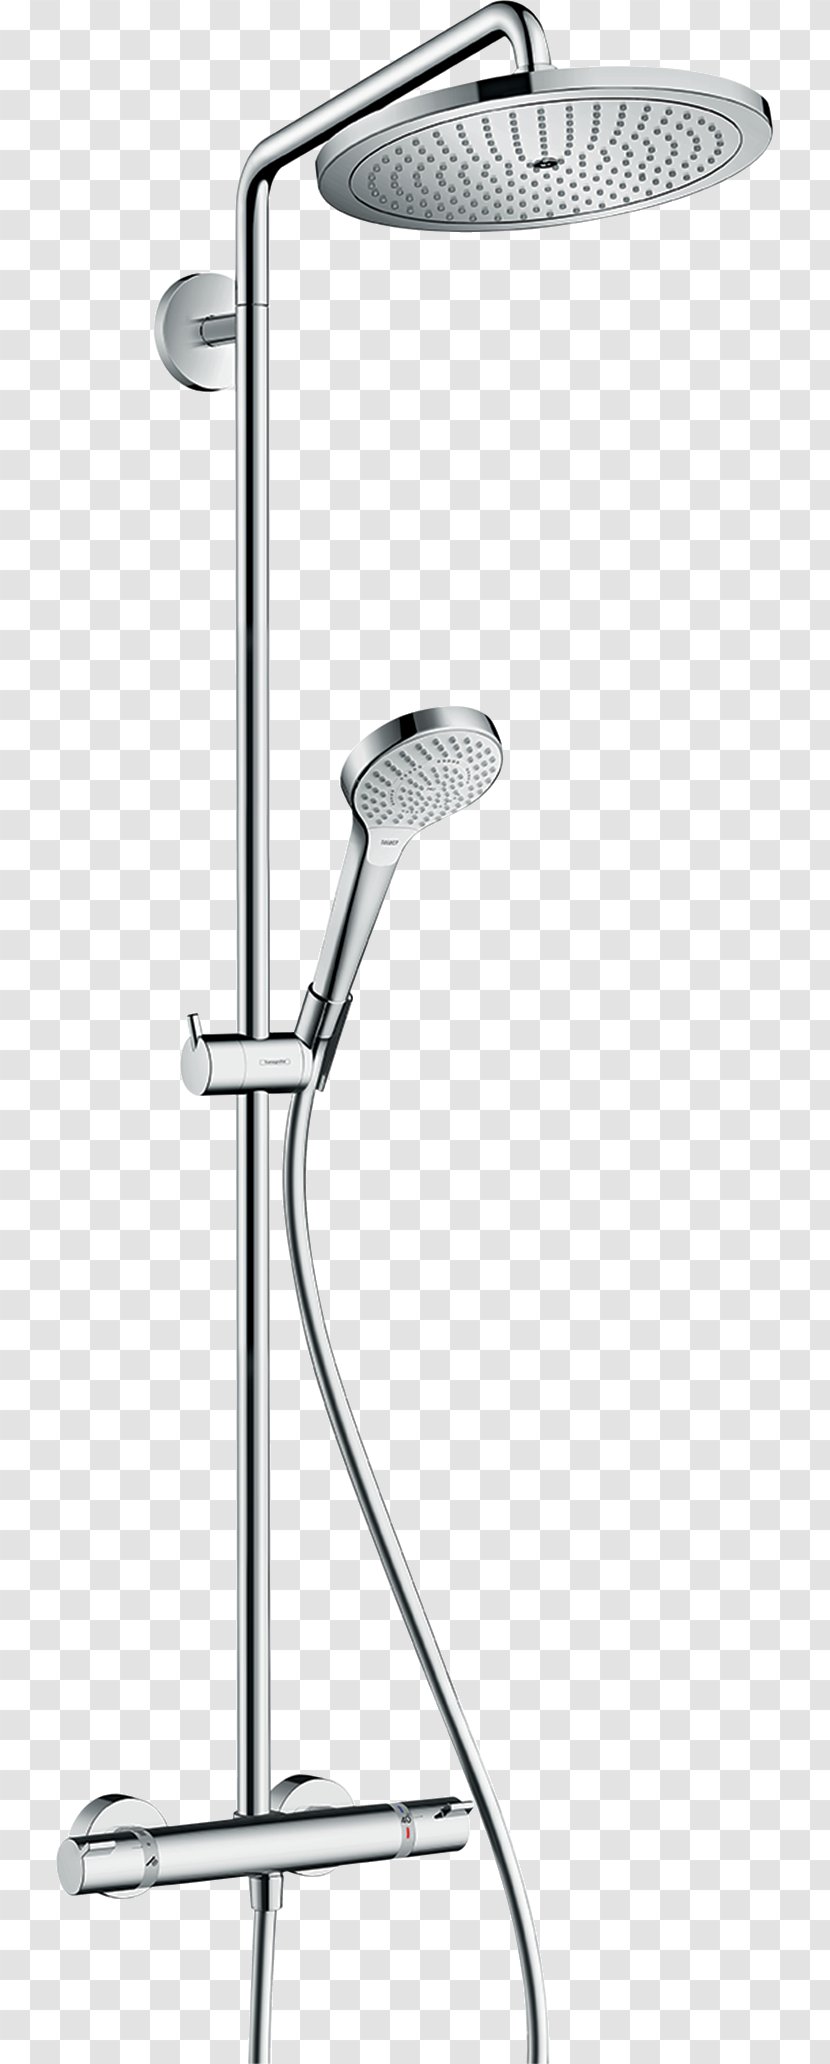 Shower Hansgrohe Thermostatic Mixing Valve - Bathtub Transparent PNG